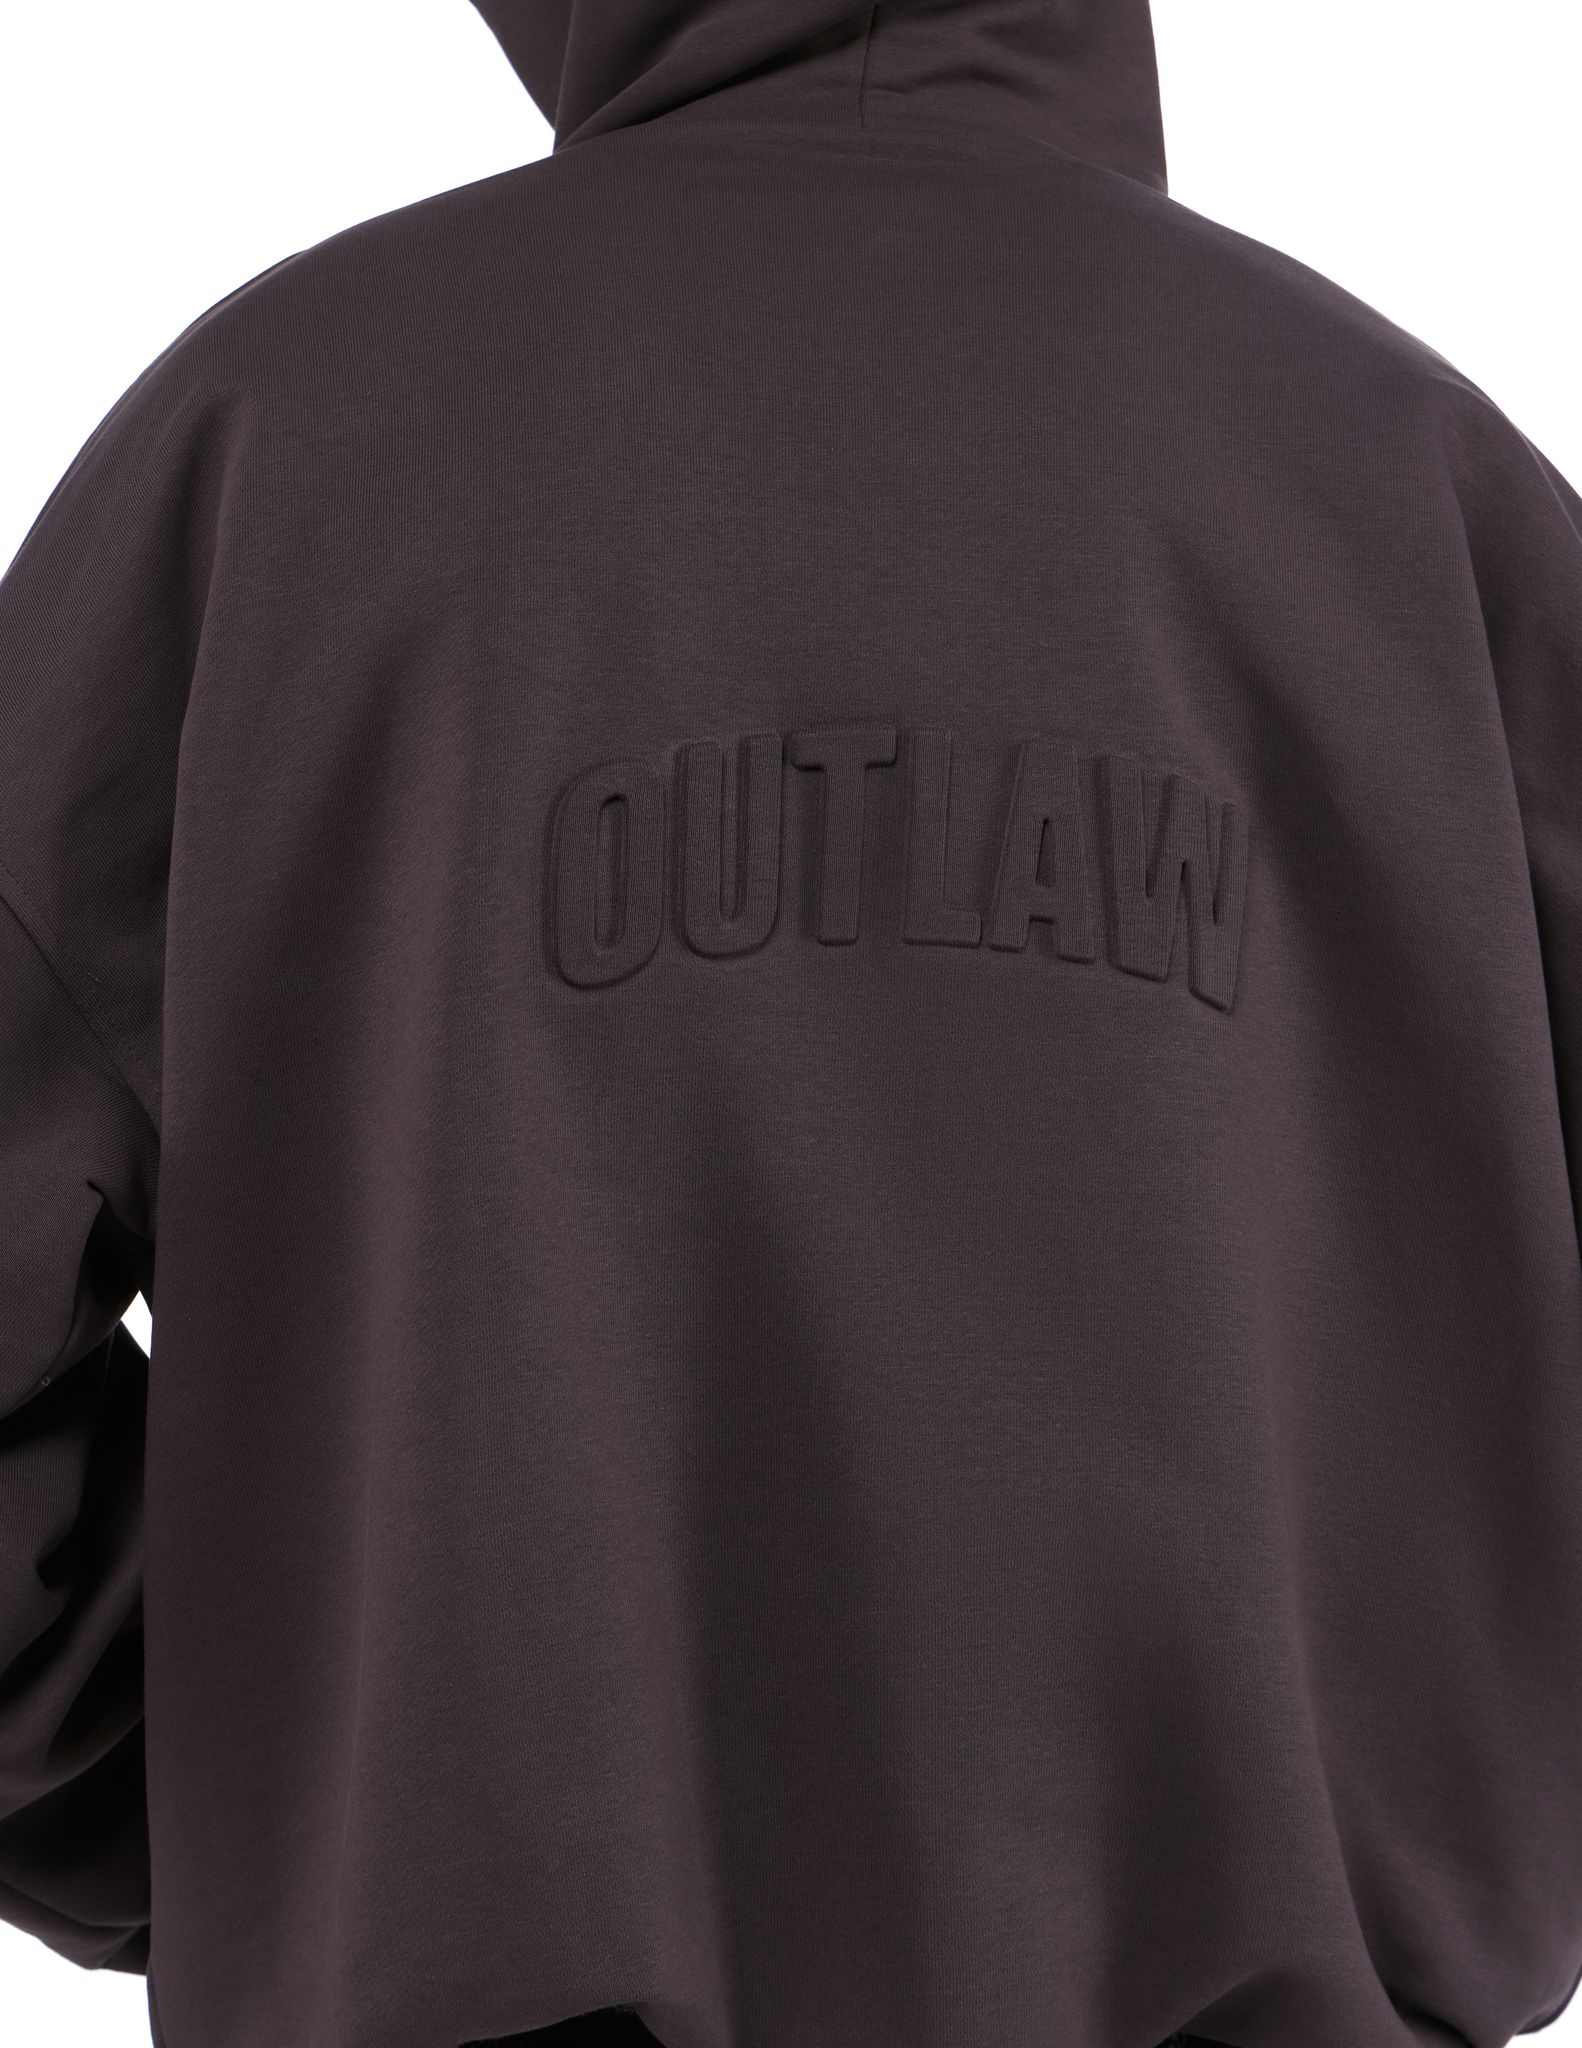 Charcoal Bubble Outlaw Hoodie